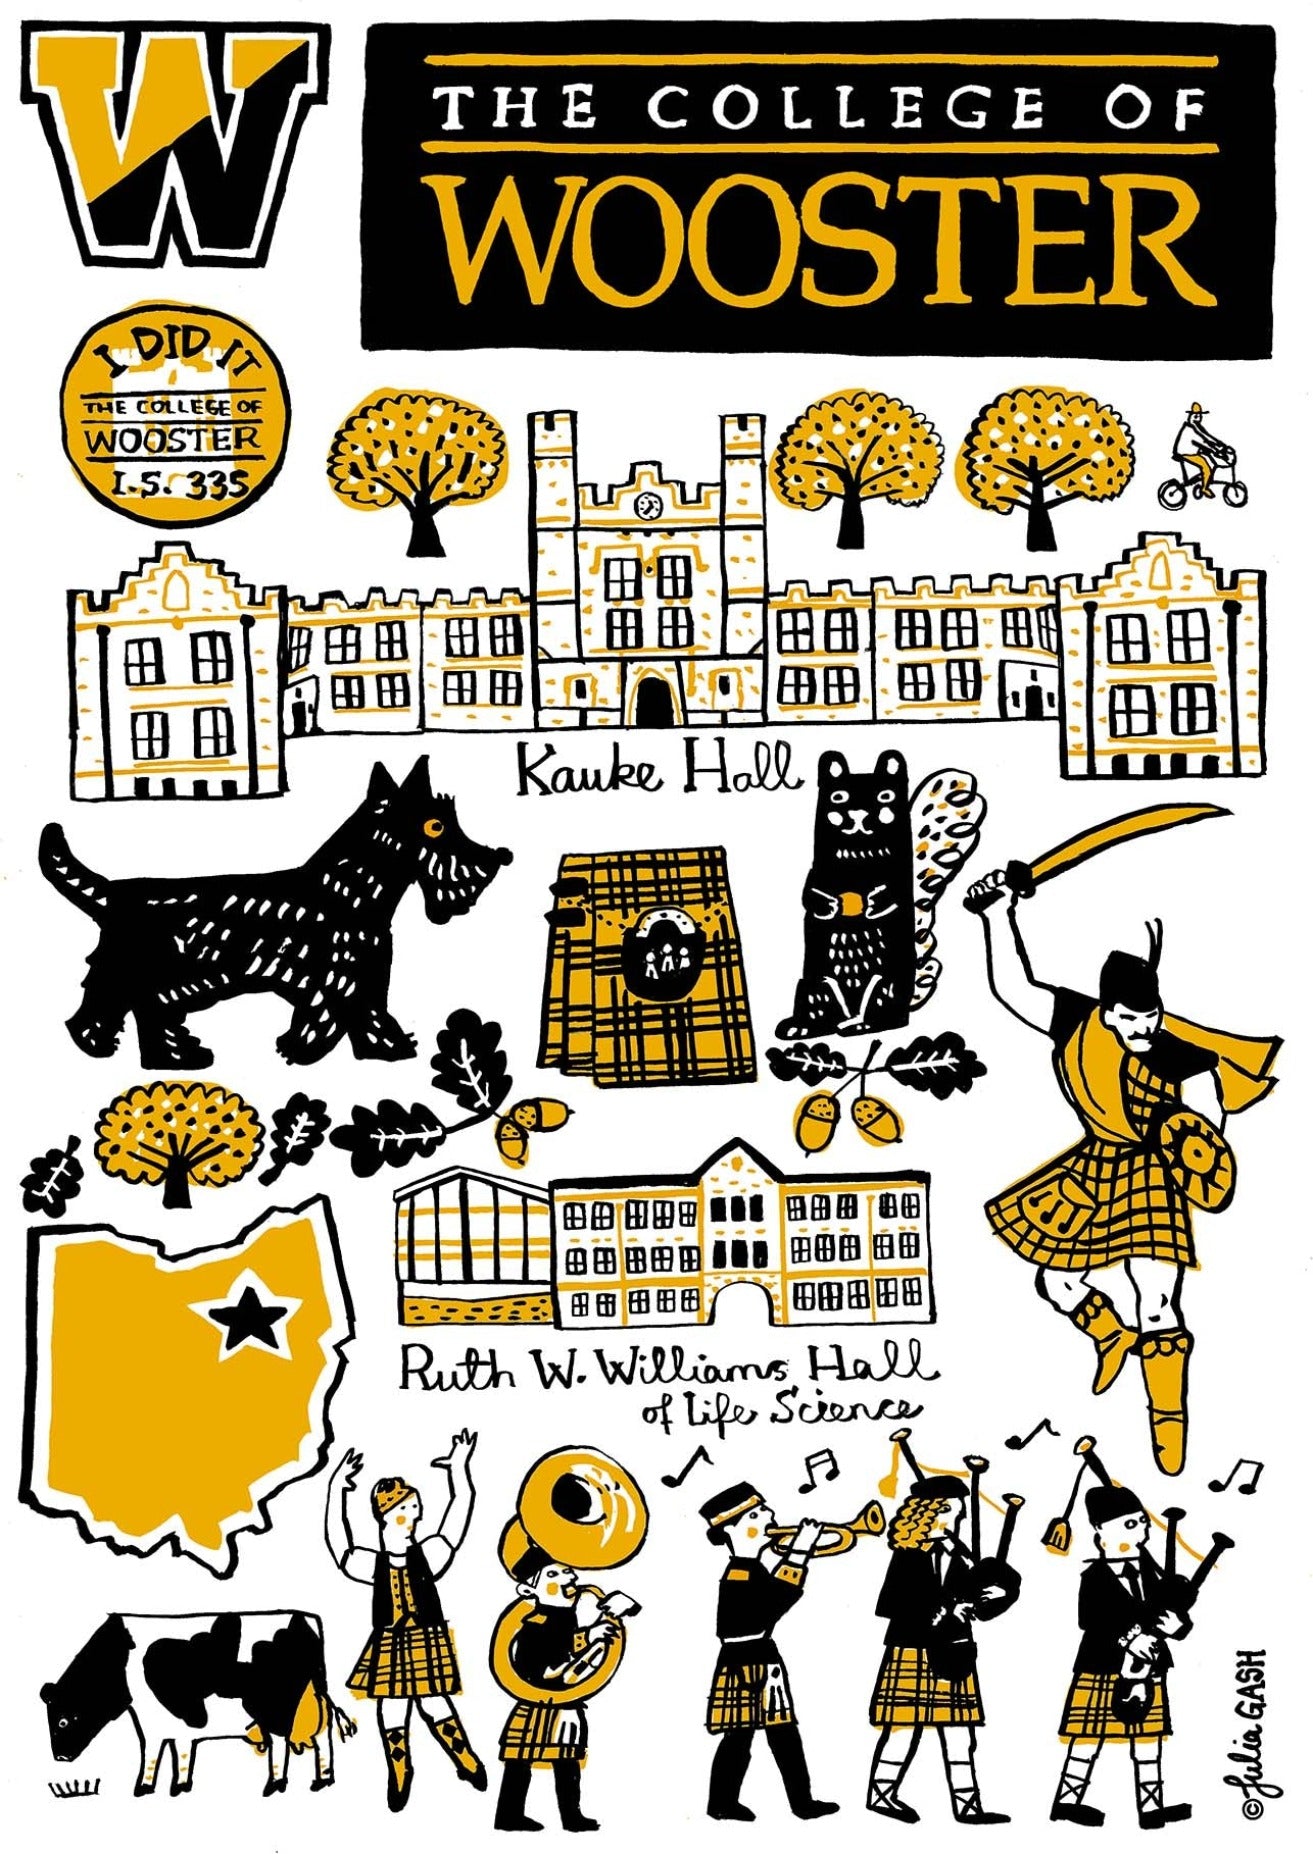 College of Wooster by Julia Gash